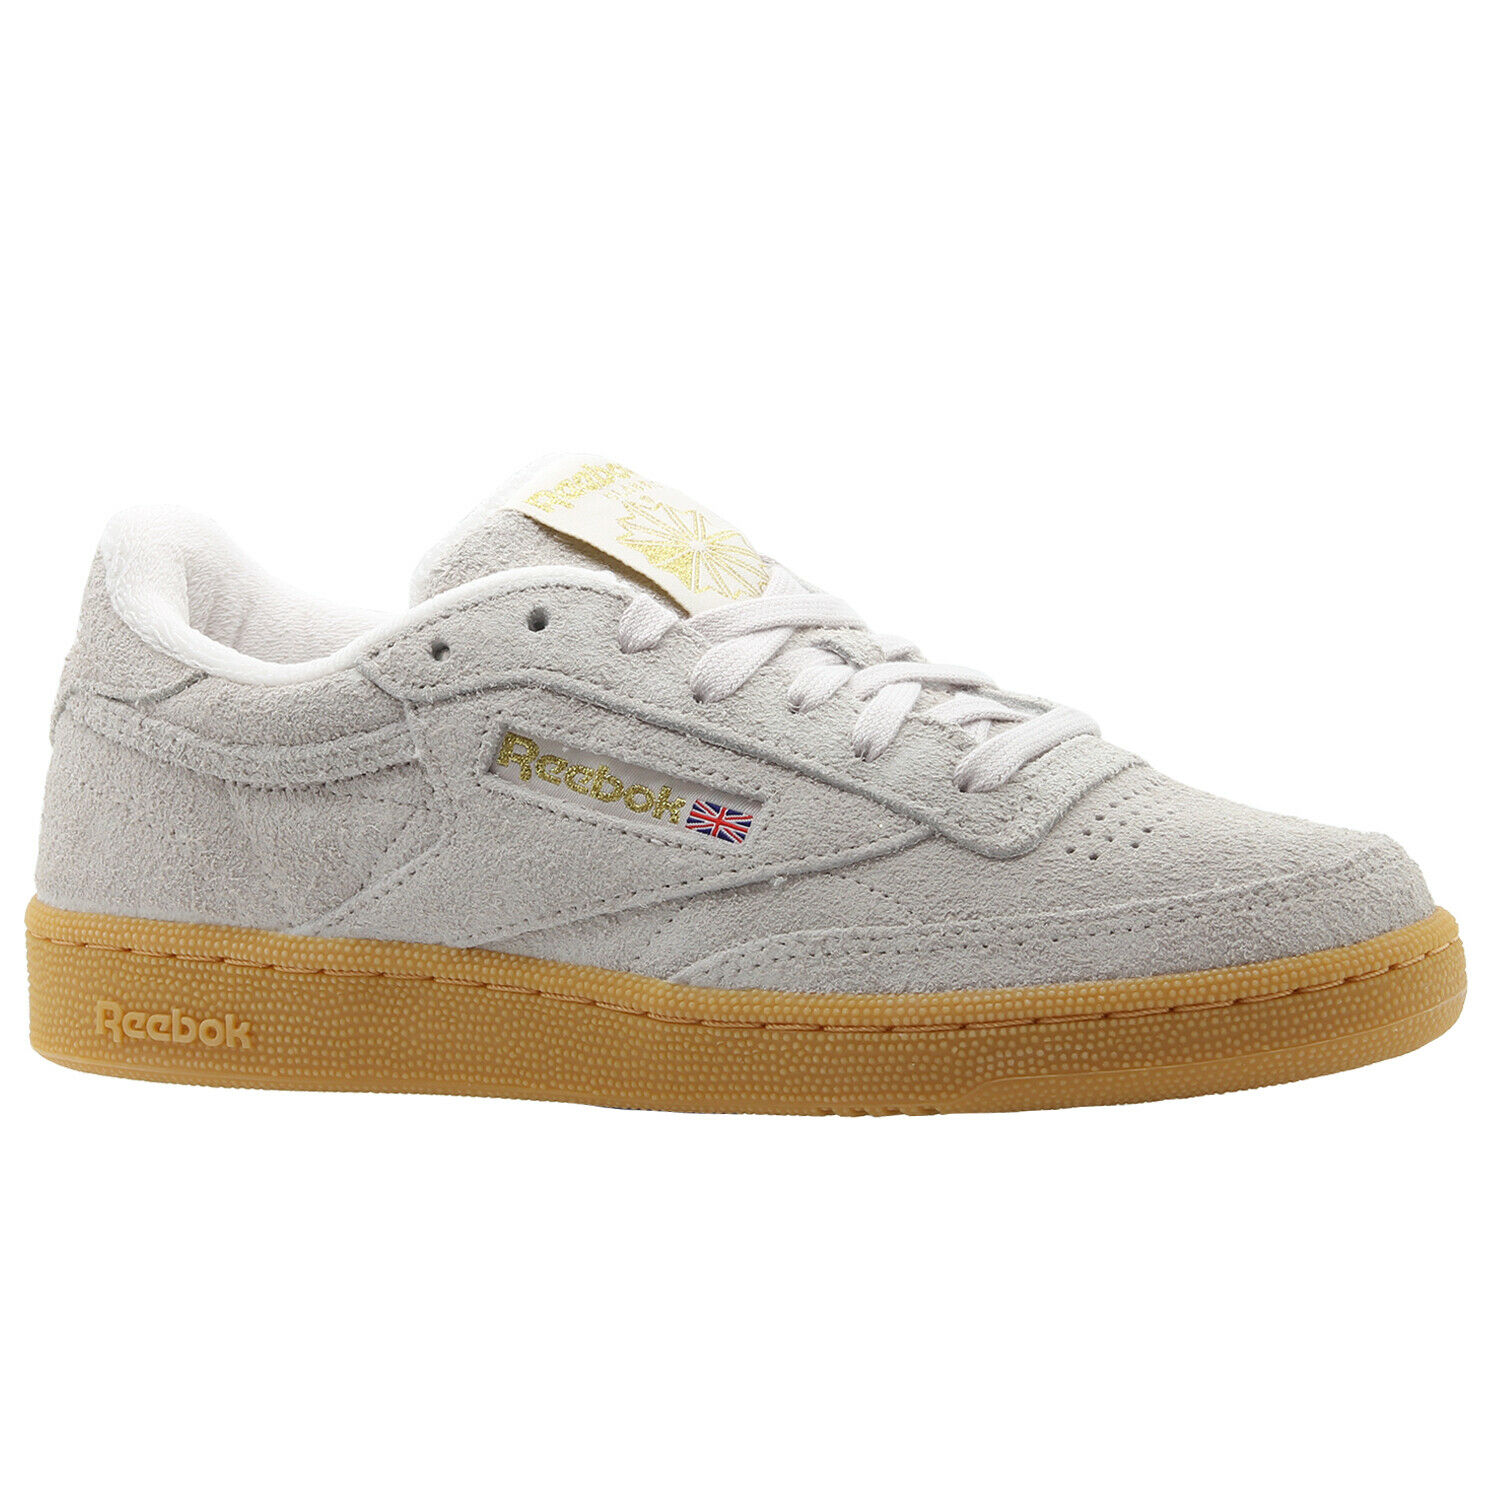 CLUB C 85 TS TRAINERS SHOES BEIGE SUEDE 